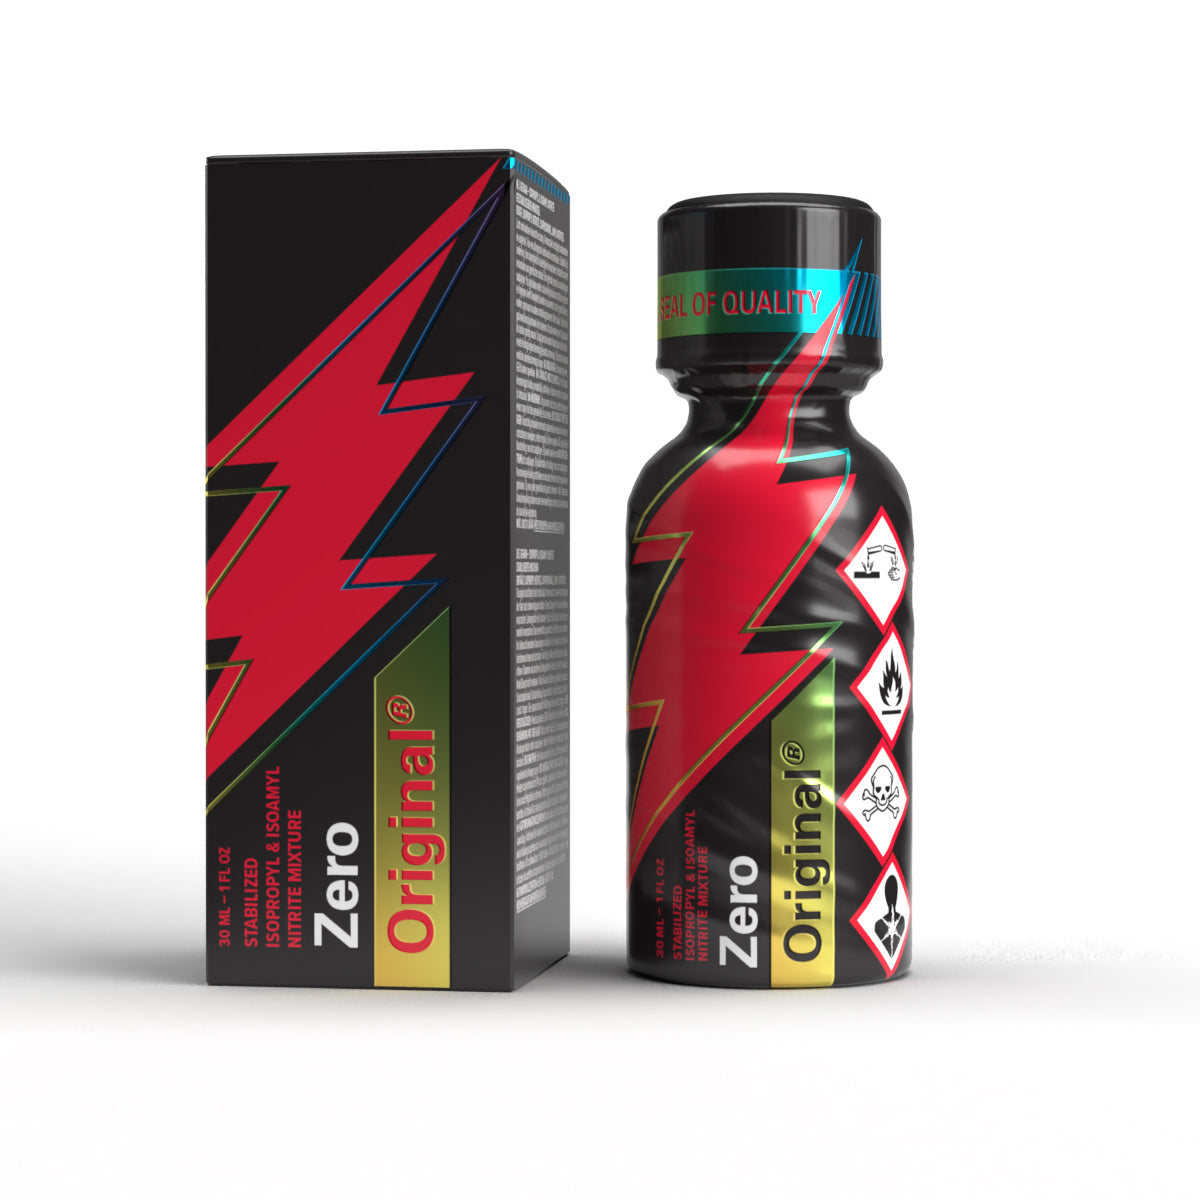 A product photo of a 30ml bottle of Original Zero Poppers.